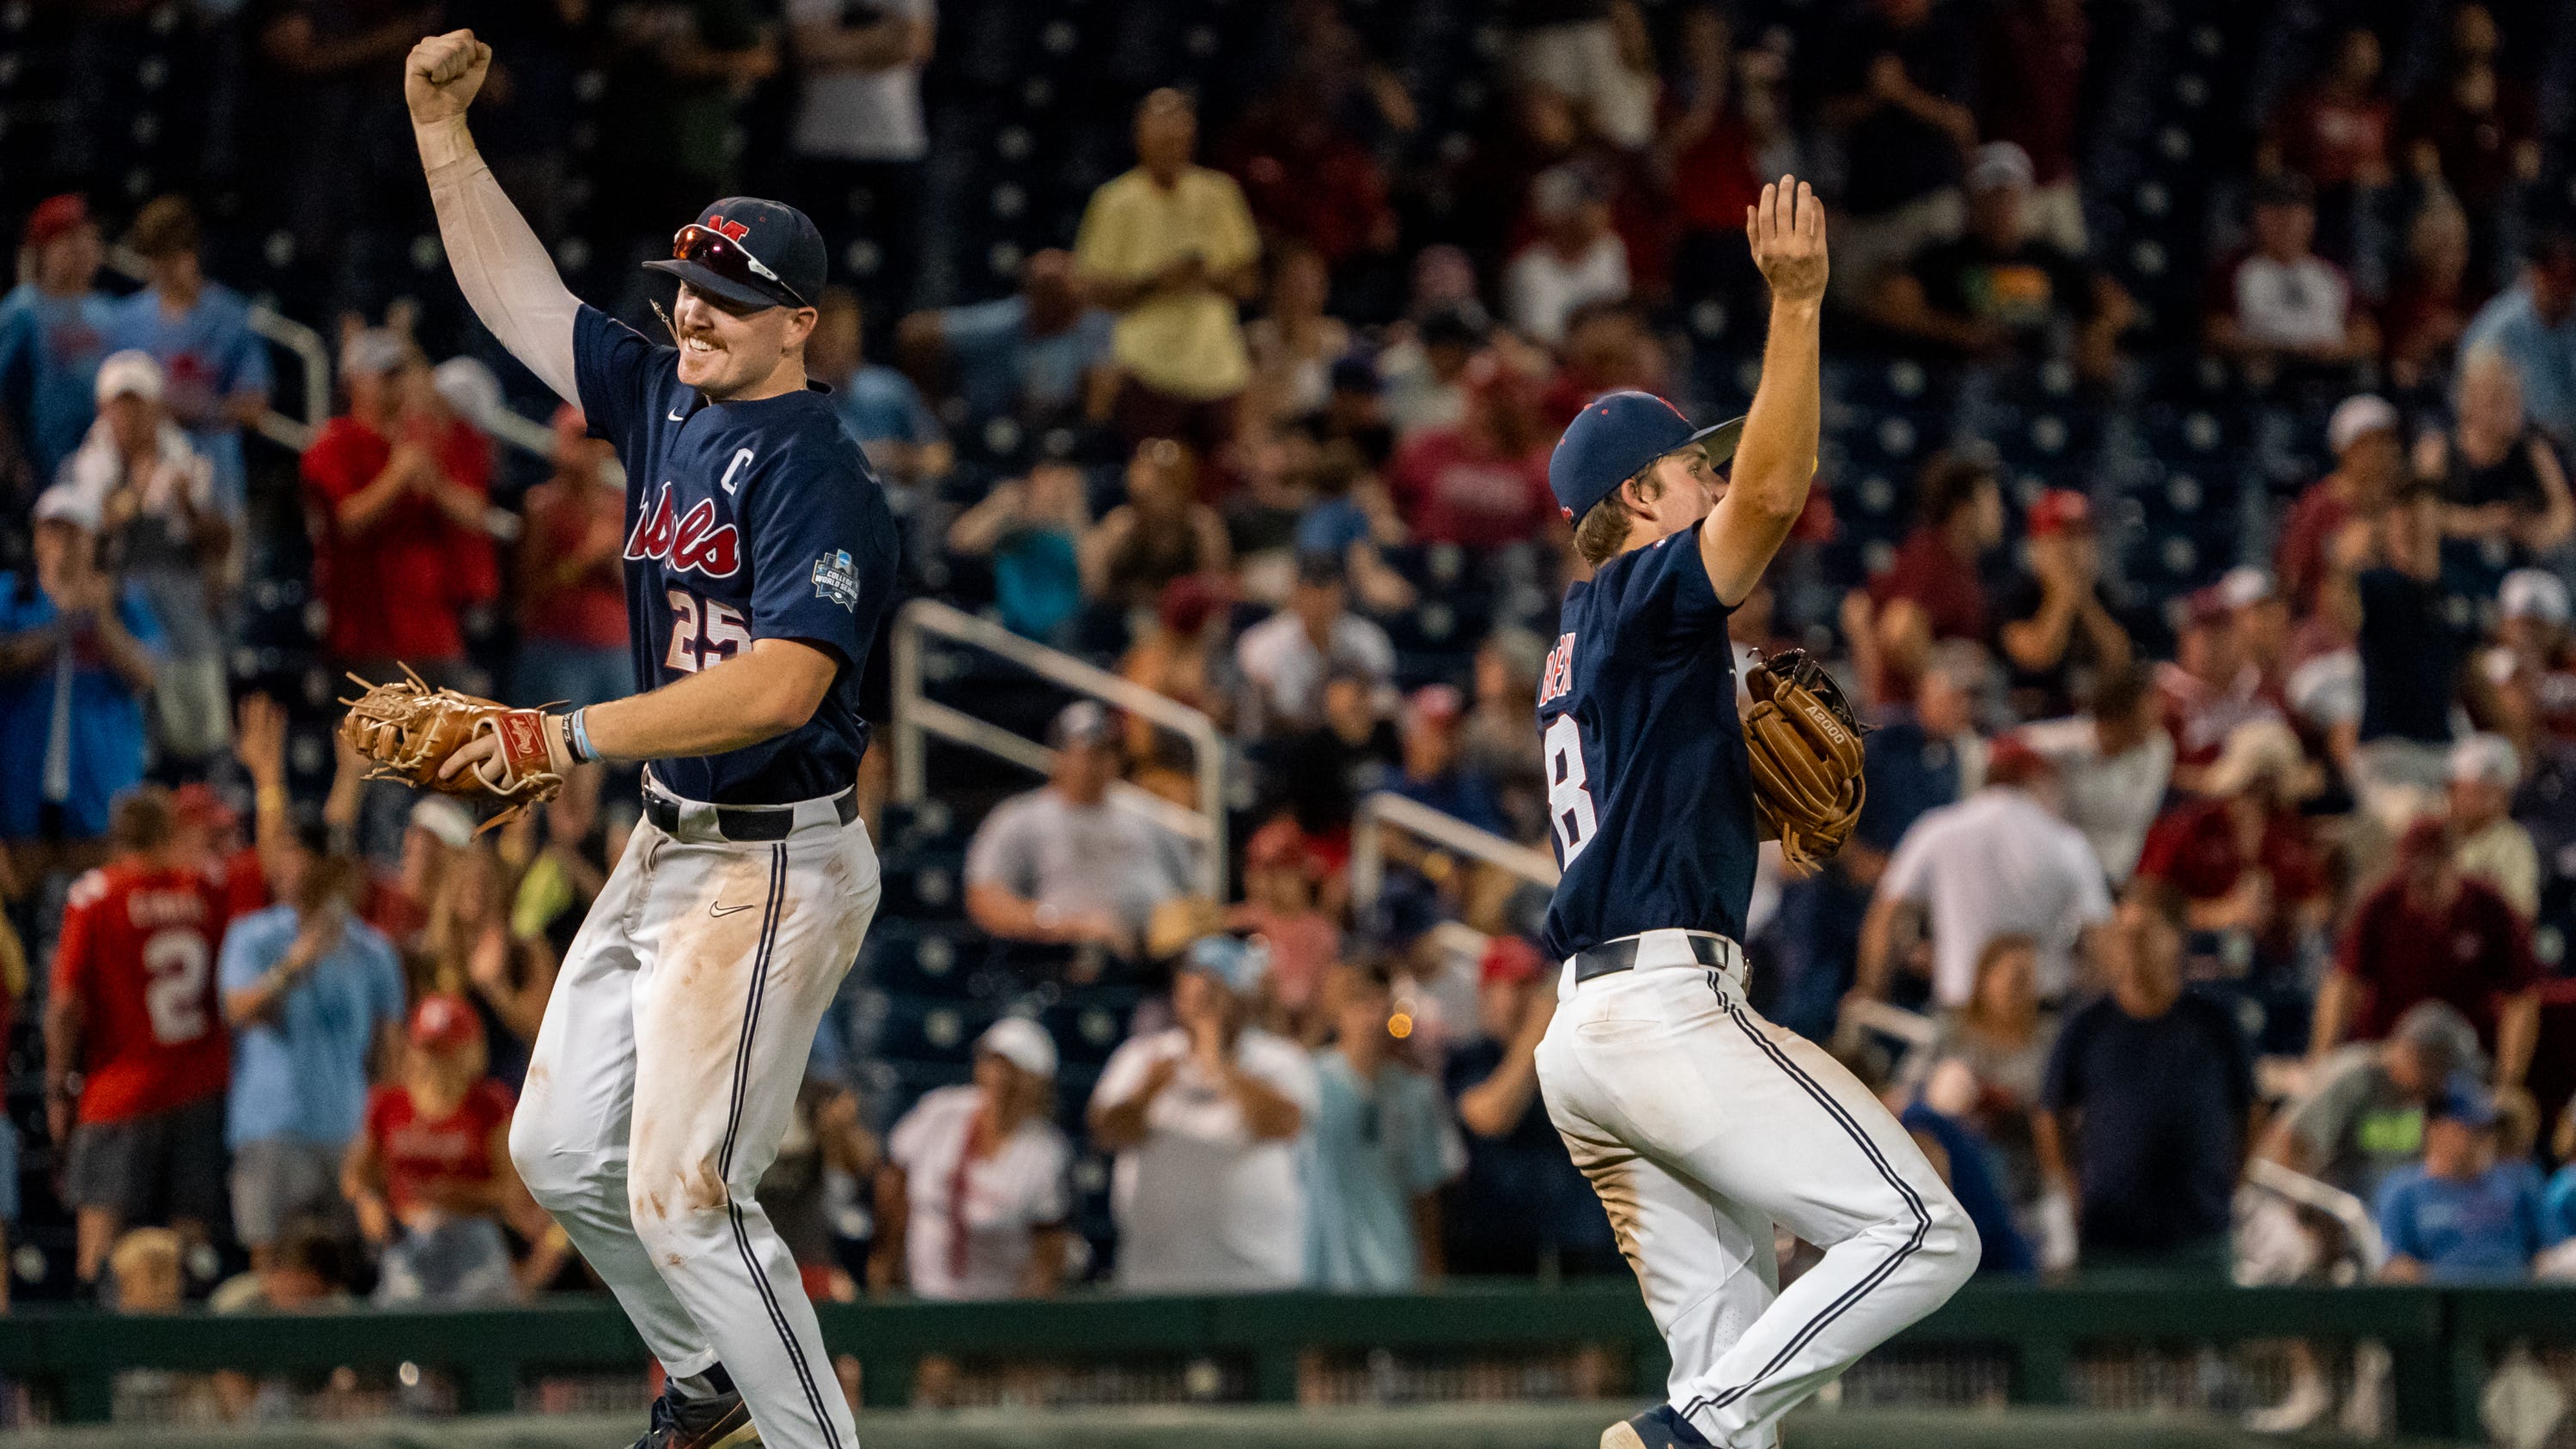 How to watch Ole Miss vs. Arkansas baseball on TV, live stream at CWS